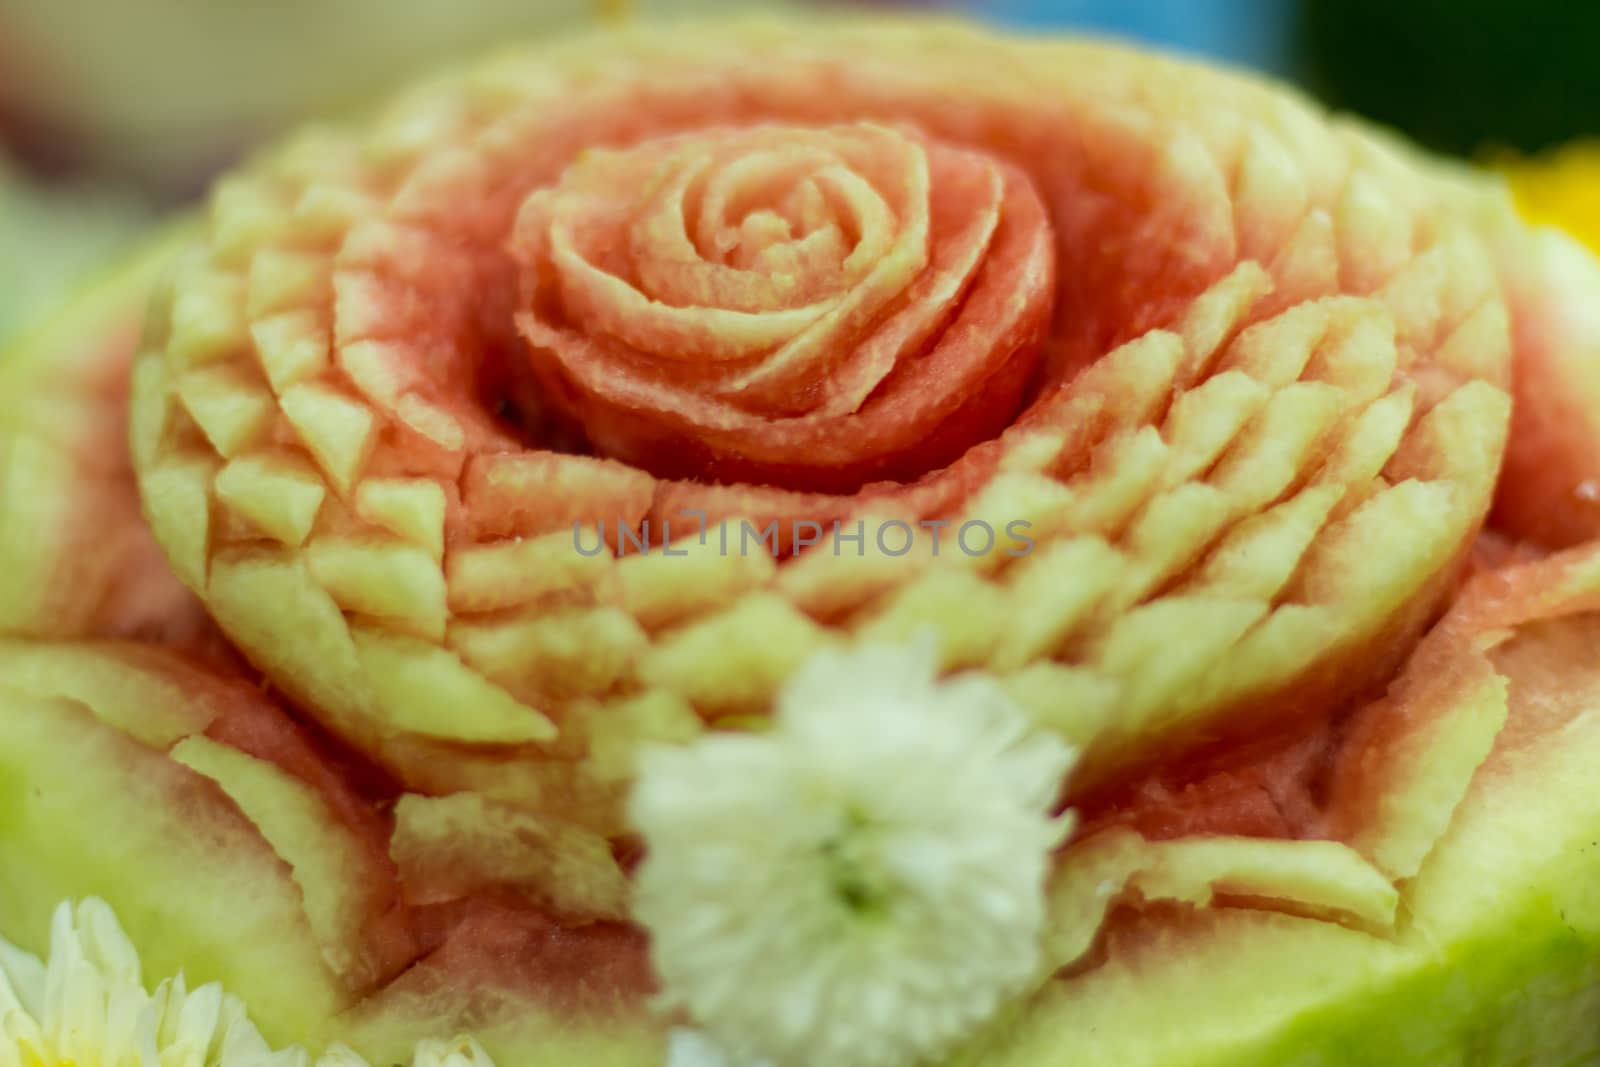 Display of Thai intricately carved water melon